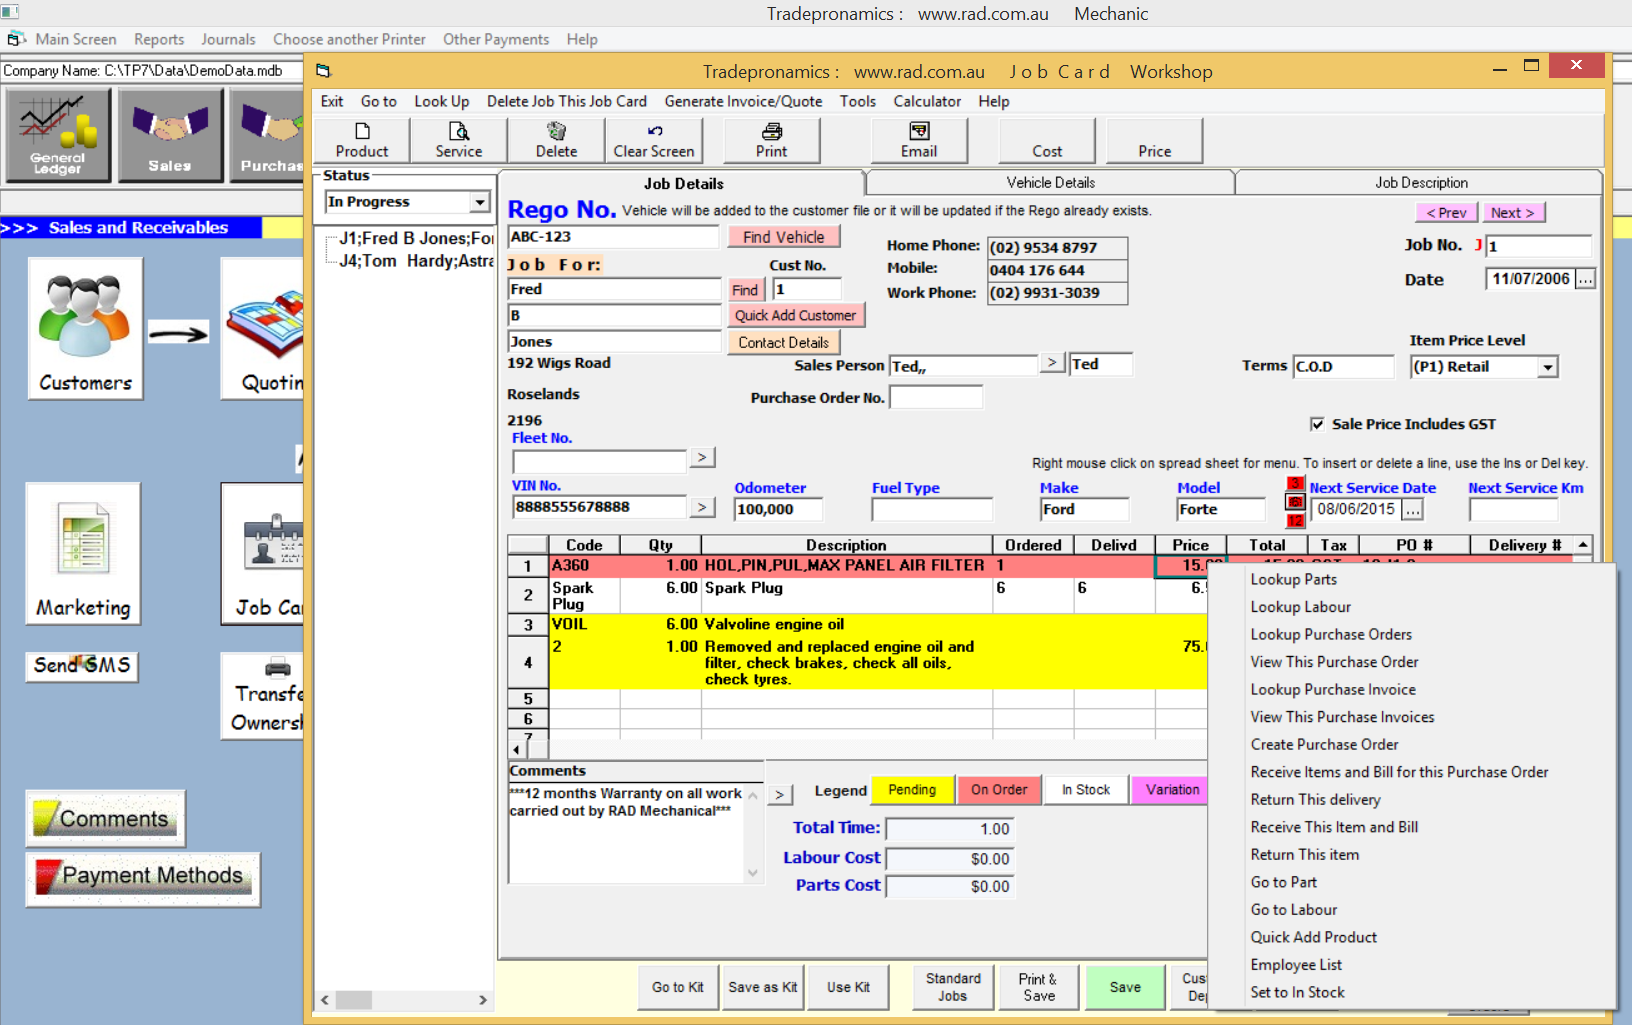 Auto Repair Invoice Software  Workshop Manager Software Intended For Job Card Template Mechanic